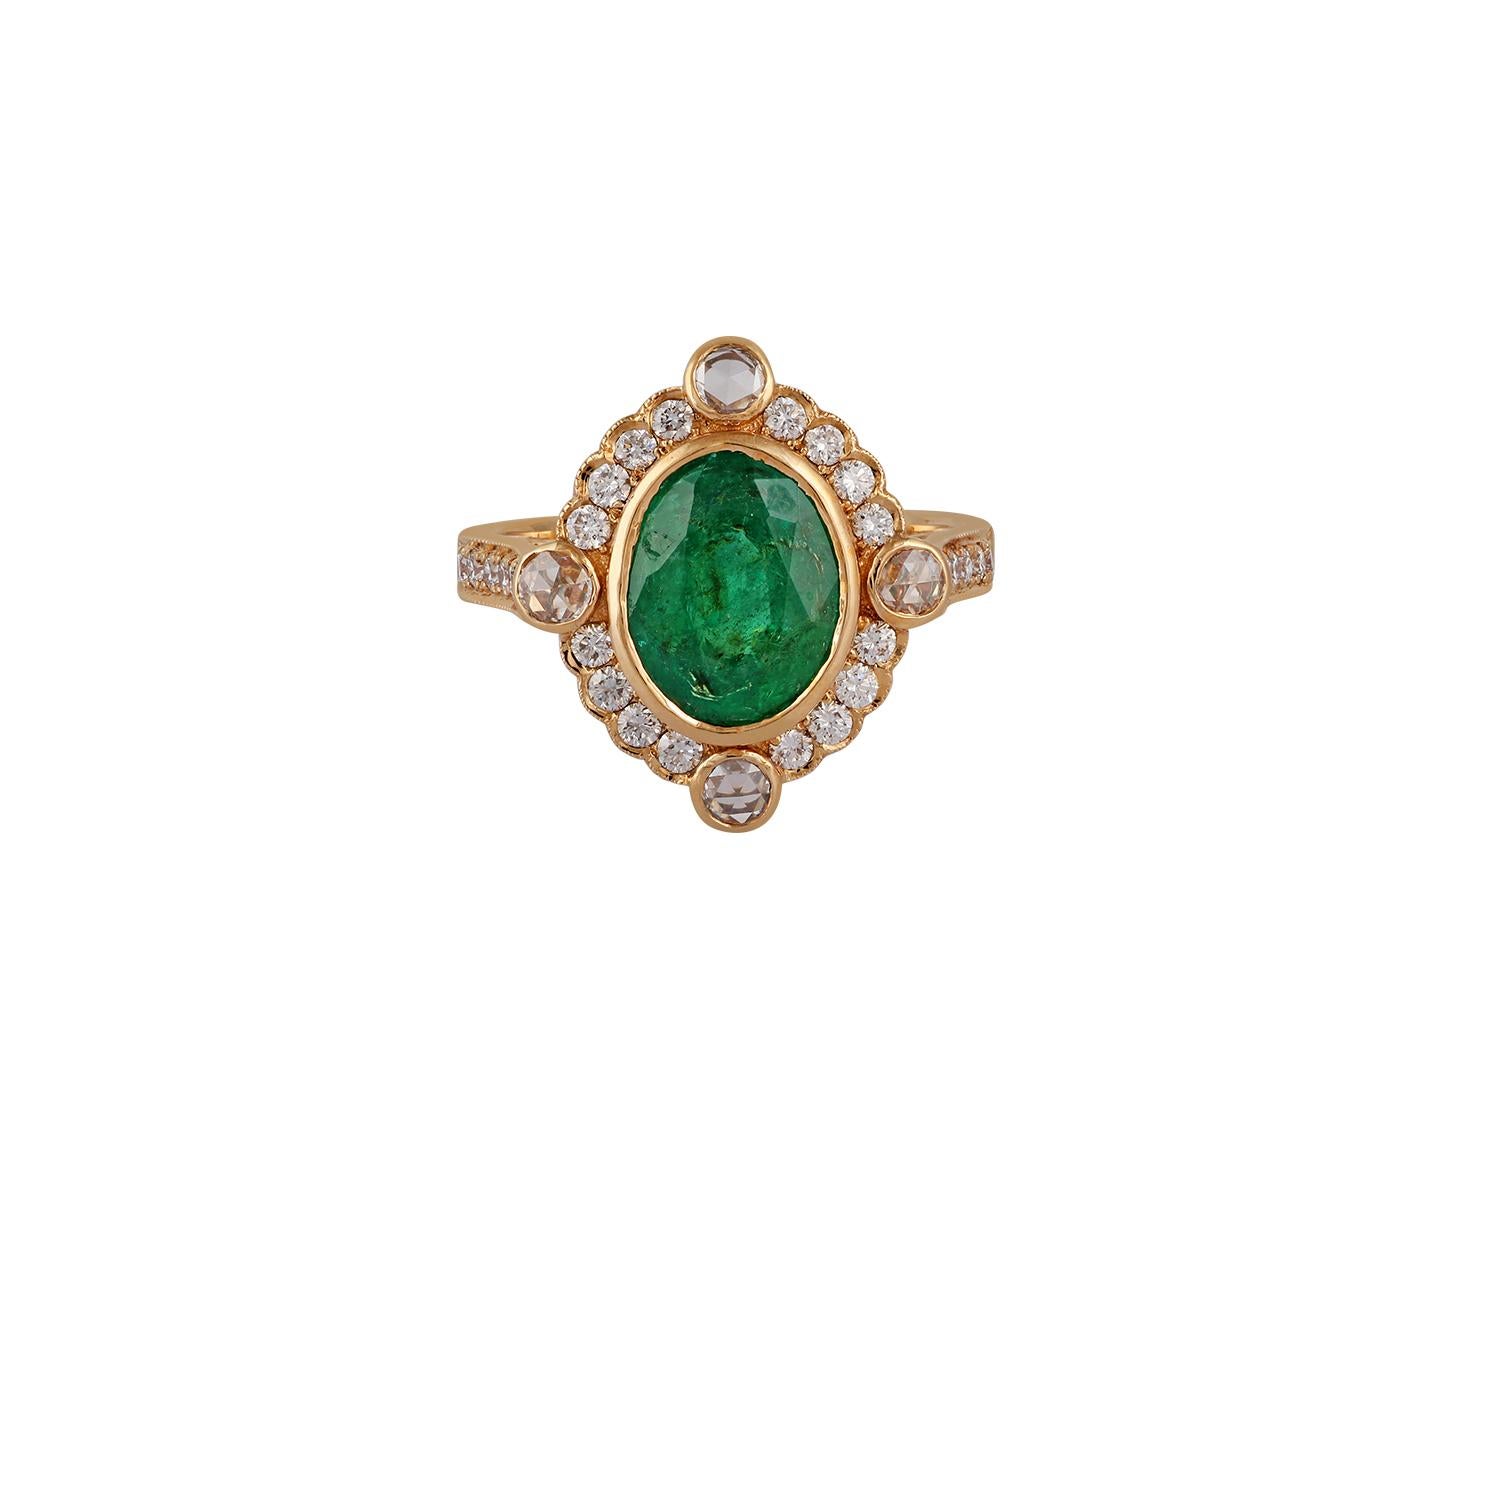 Contemporary 2.47 Carat Carved Zambian Emerald & Cluster Diamond Ring in 18k Gold For Sale